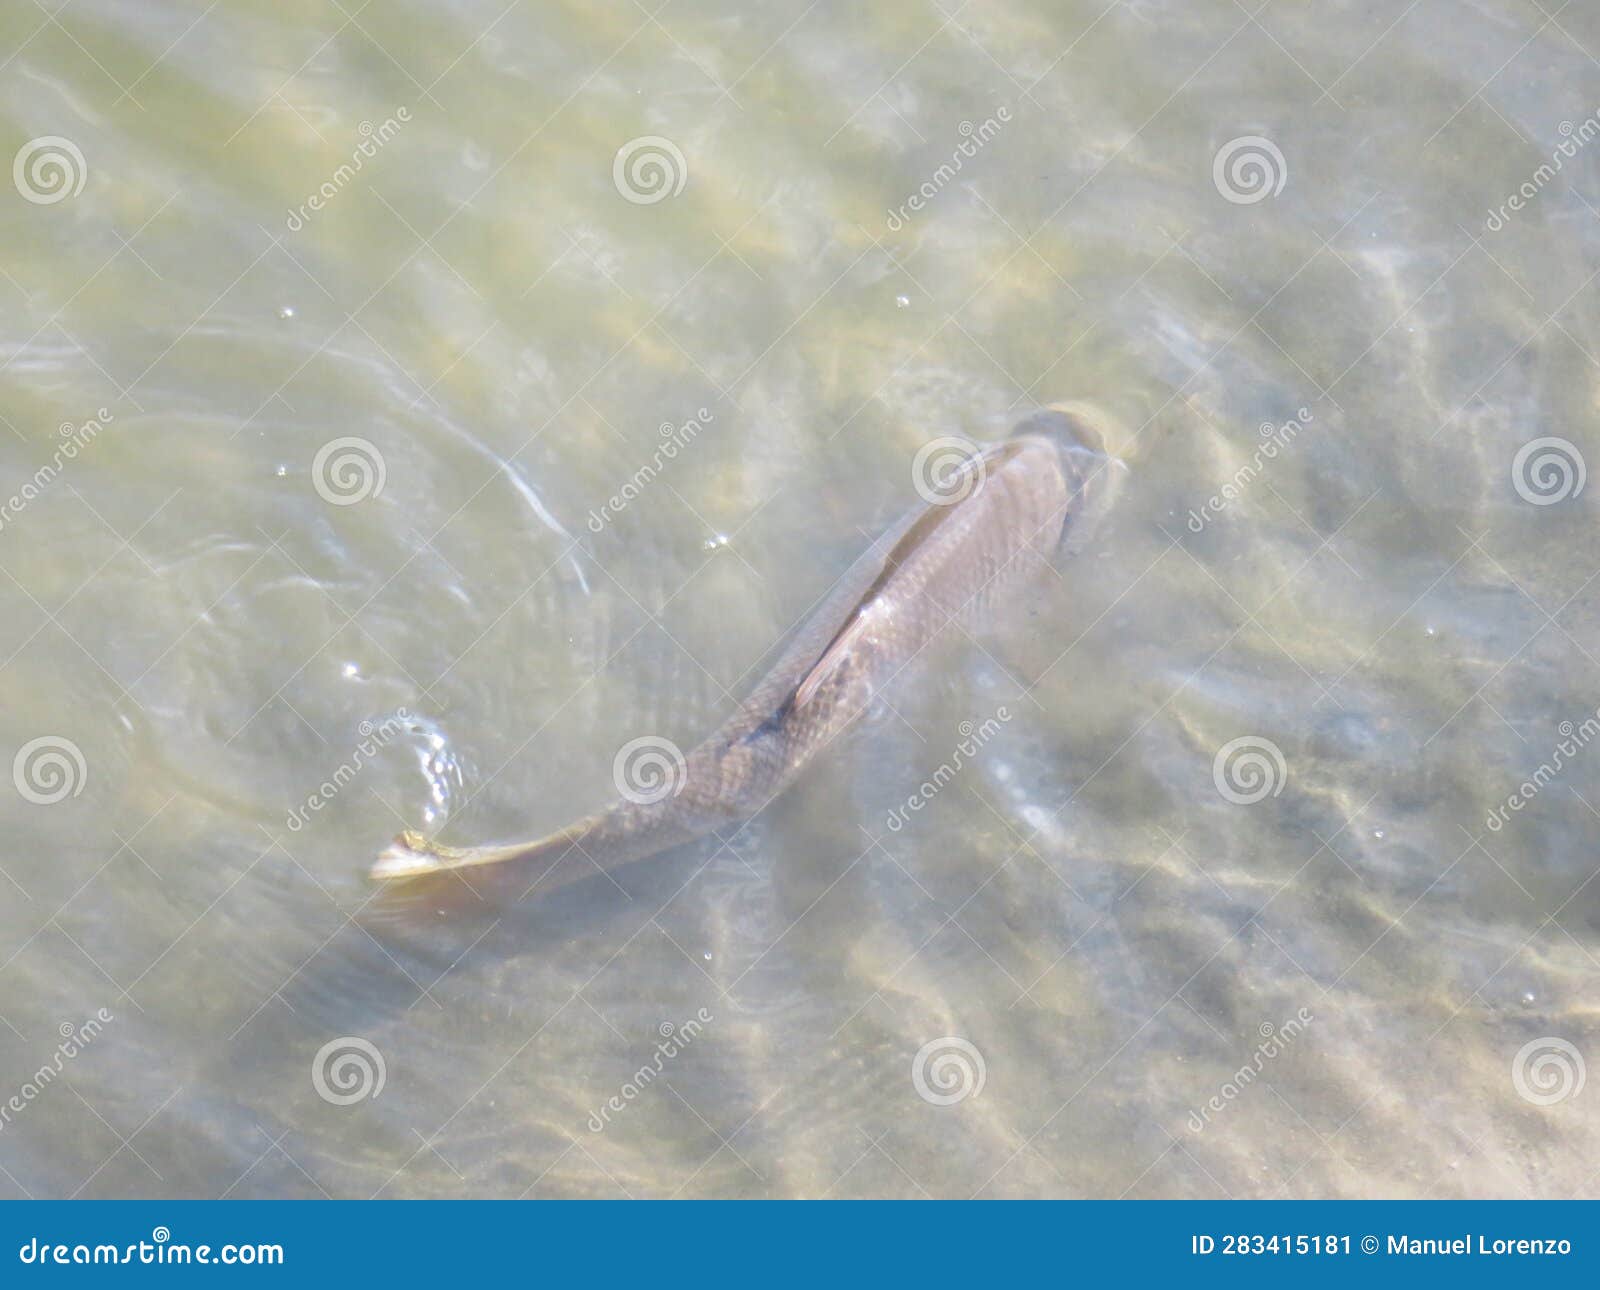 fish swimming in the river sunbathing looking for food